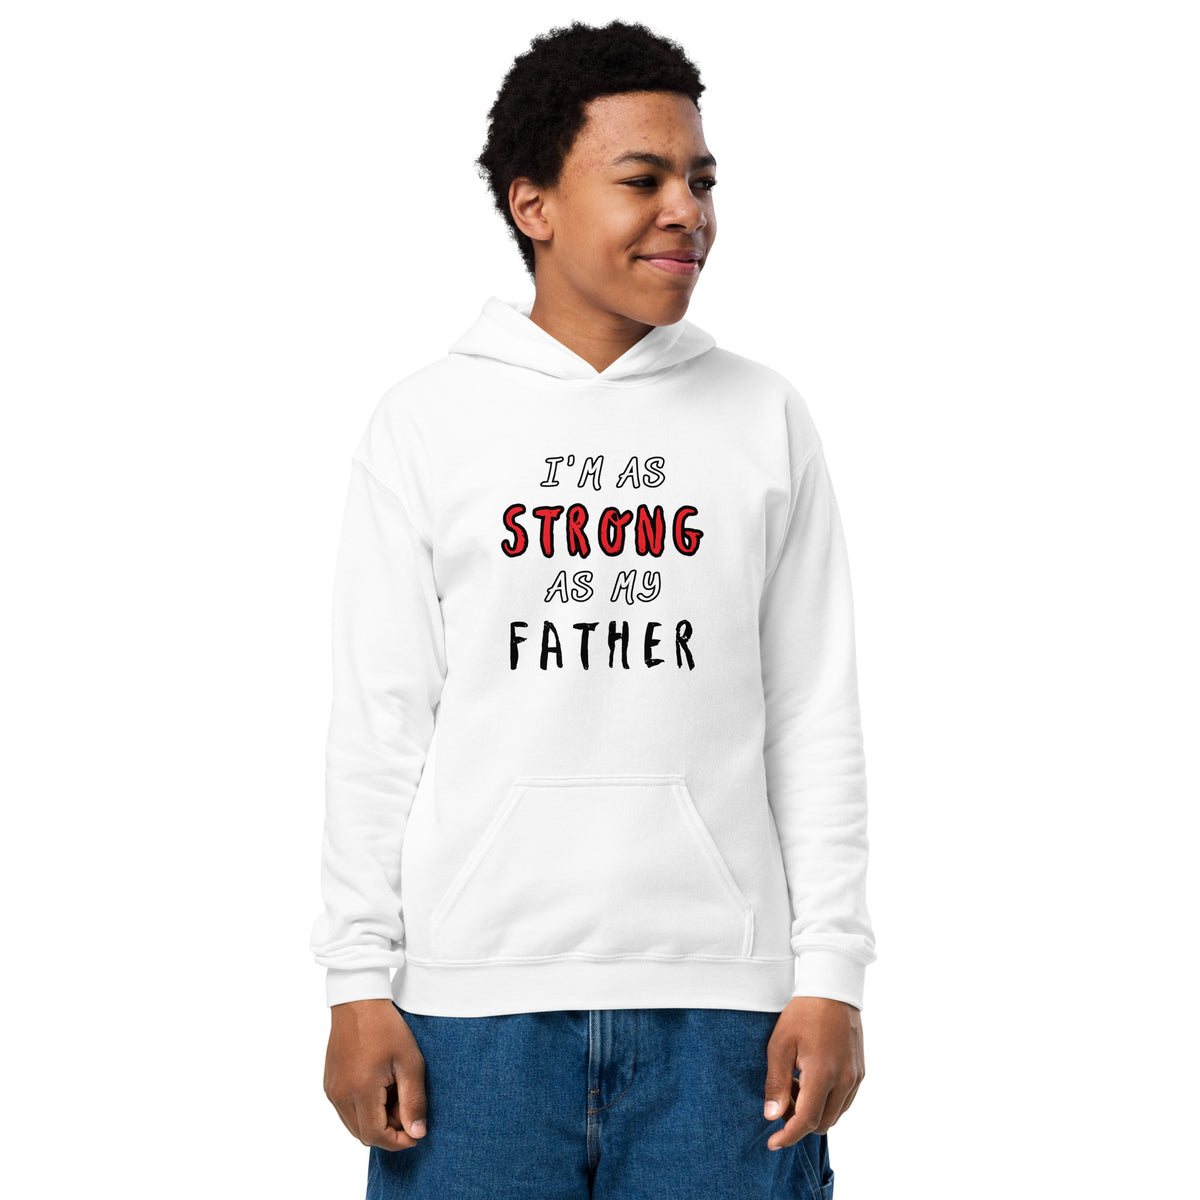 Hoodie para Niño - " I'm As Strong as my Father"